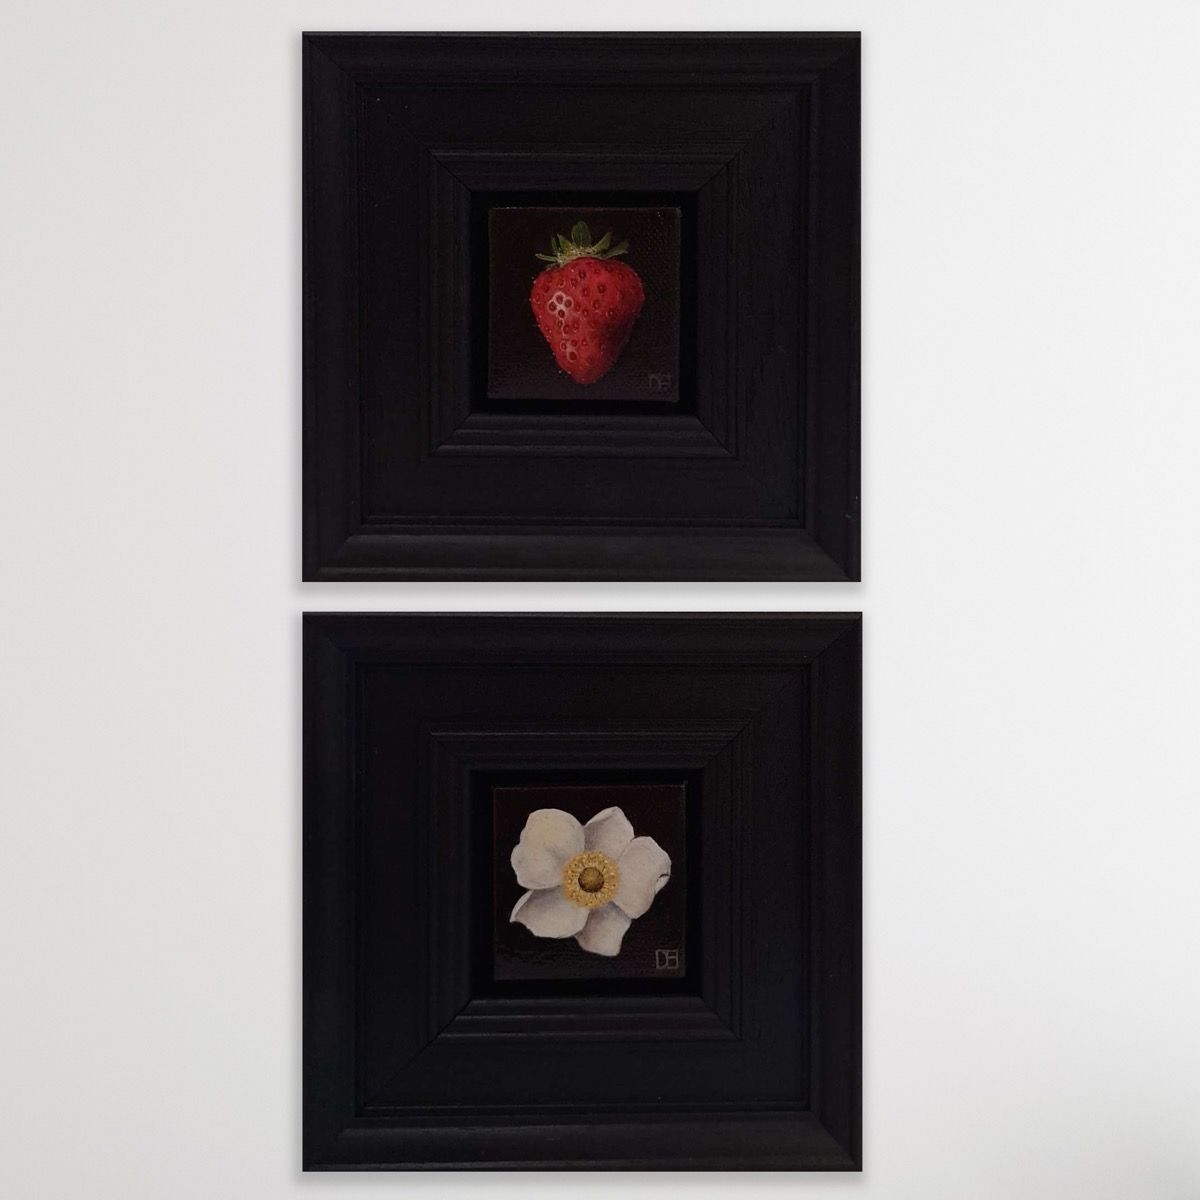 Pocket White Anemone (c) and Pocket Juicy Red Strawberry diptych by Dani Humberstone